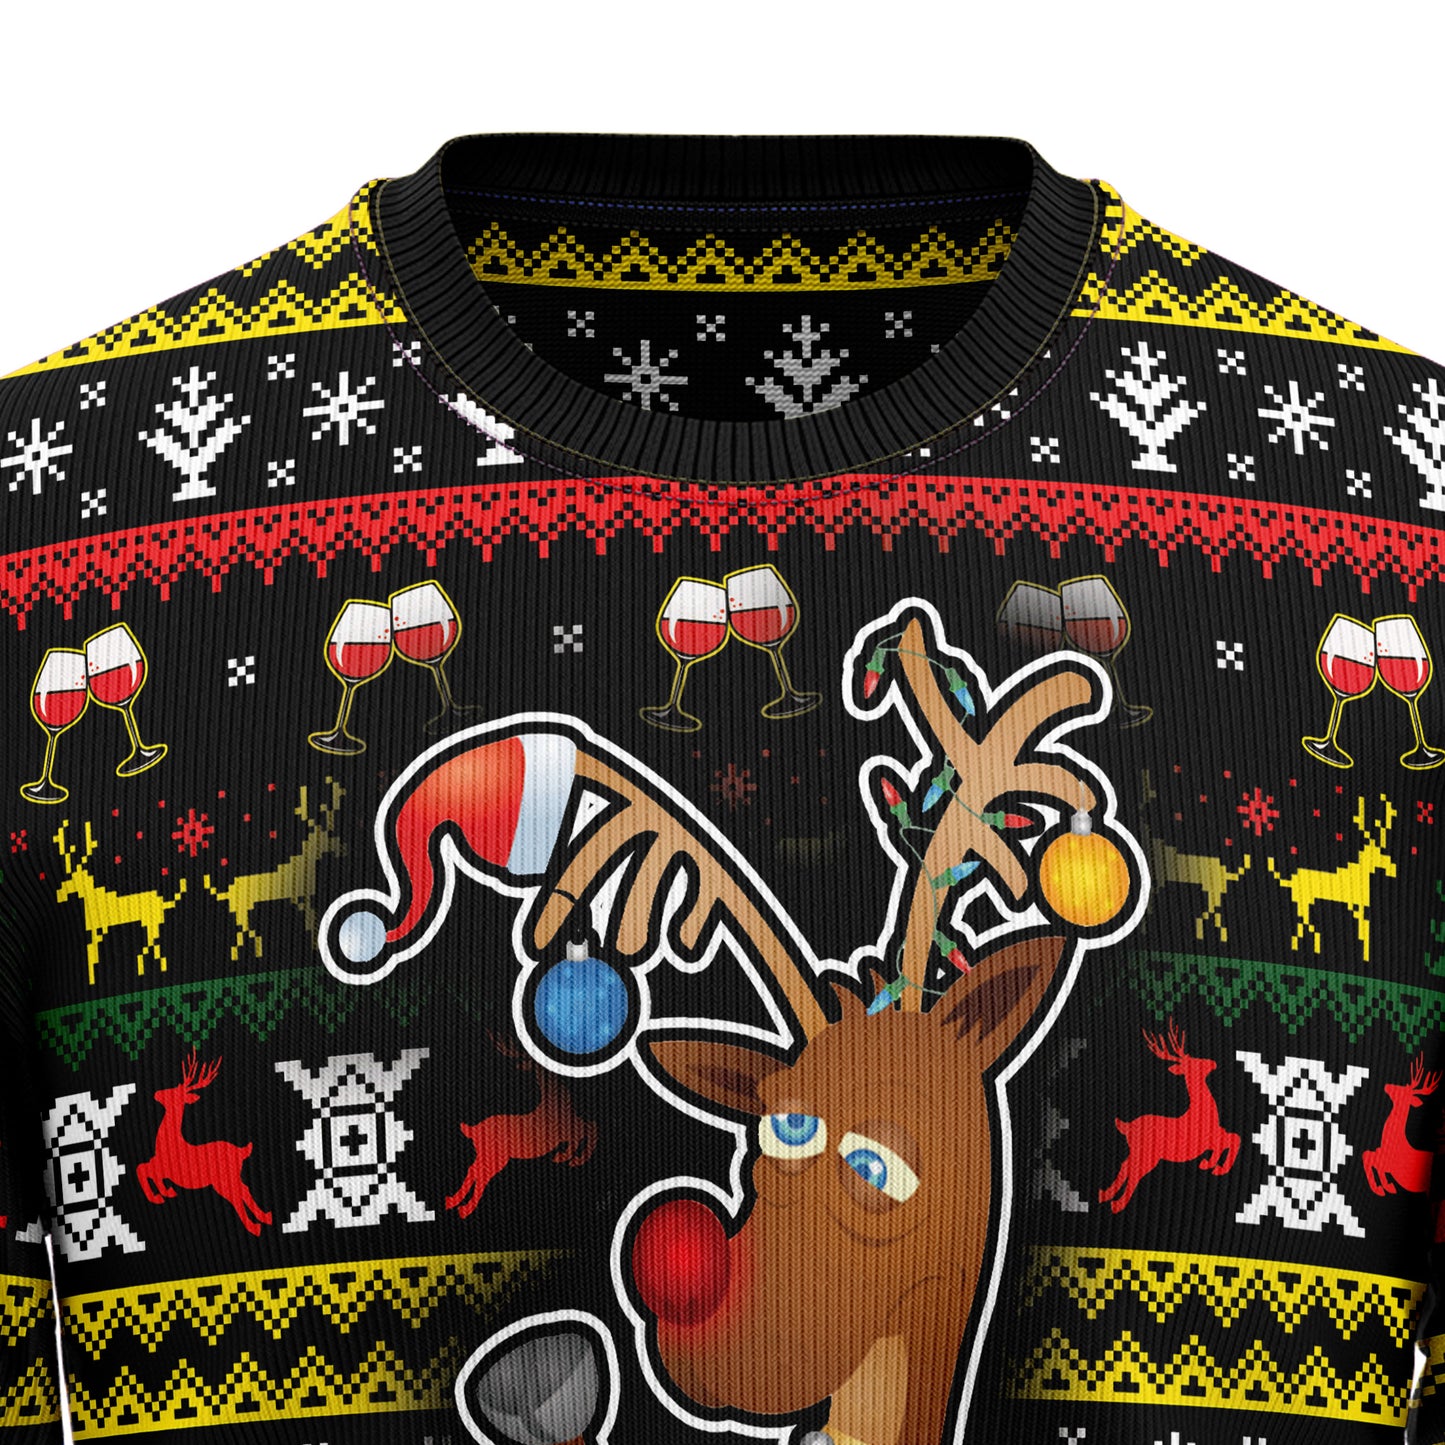 Time To Get Blitzened HT081201 Ugly Christmas Sweater